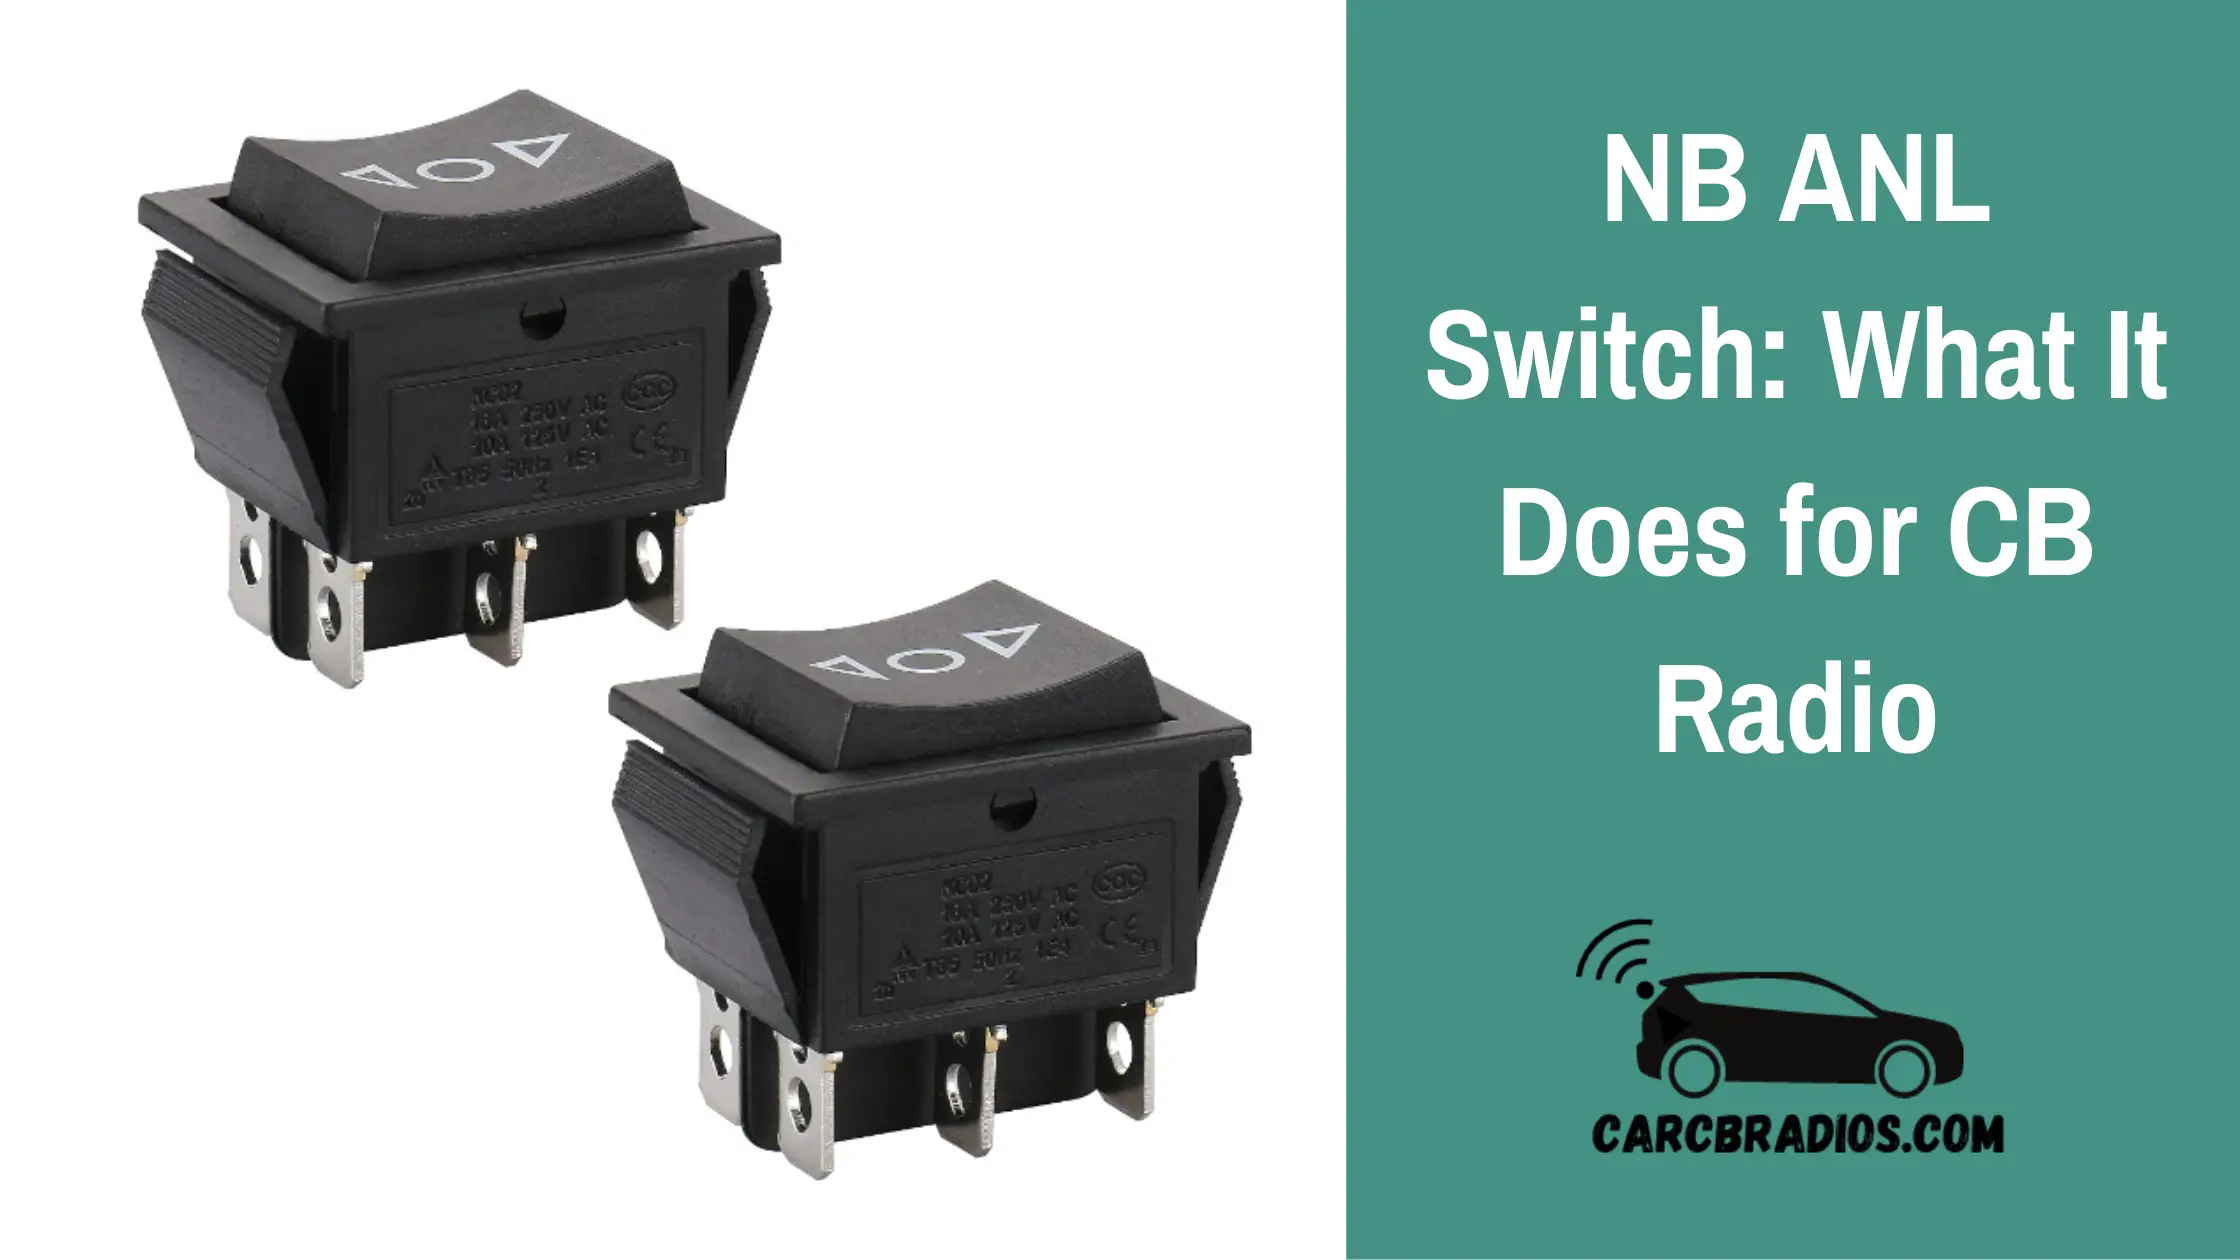 To ensure the best possible reception, it's important to set the NB/ANL switch to the "on" position. This will activate the Noise Blanker and Automatic Noise Limiter, which will work to filter out any unwanted noise and interference. By making use of these functions, you can enjoy clearer and more reliable radio transmissions, even in areas with high levels of interference.